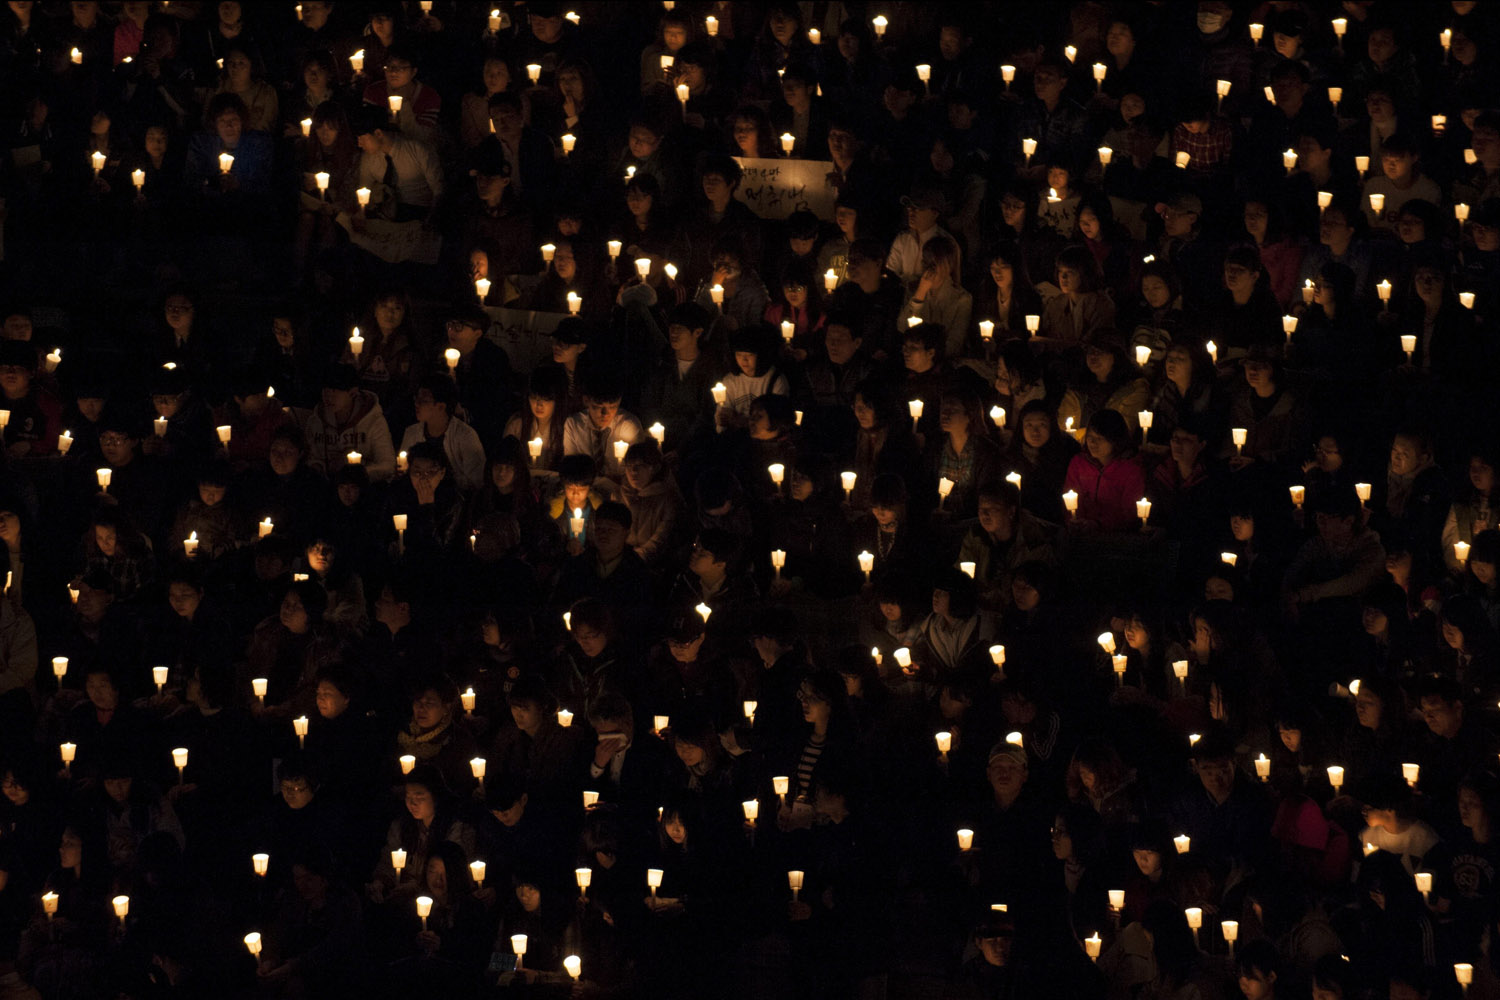 Apr. 19, 2014. People hold candles during a vigil in Ansan. Students, parents, teachers, and others from the community gathered at a park near Danwon High School to pray for the missing and mourn the dead from the Sewol ferry sinking.